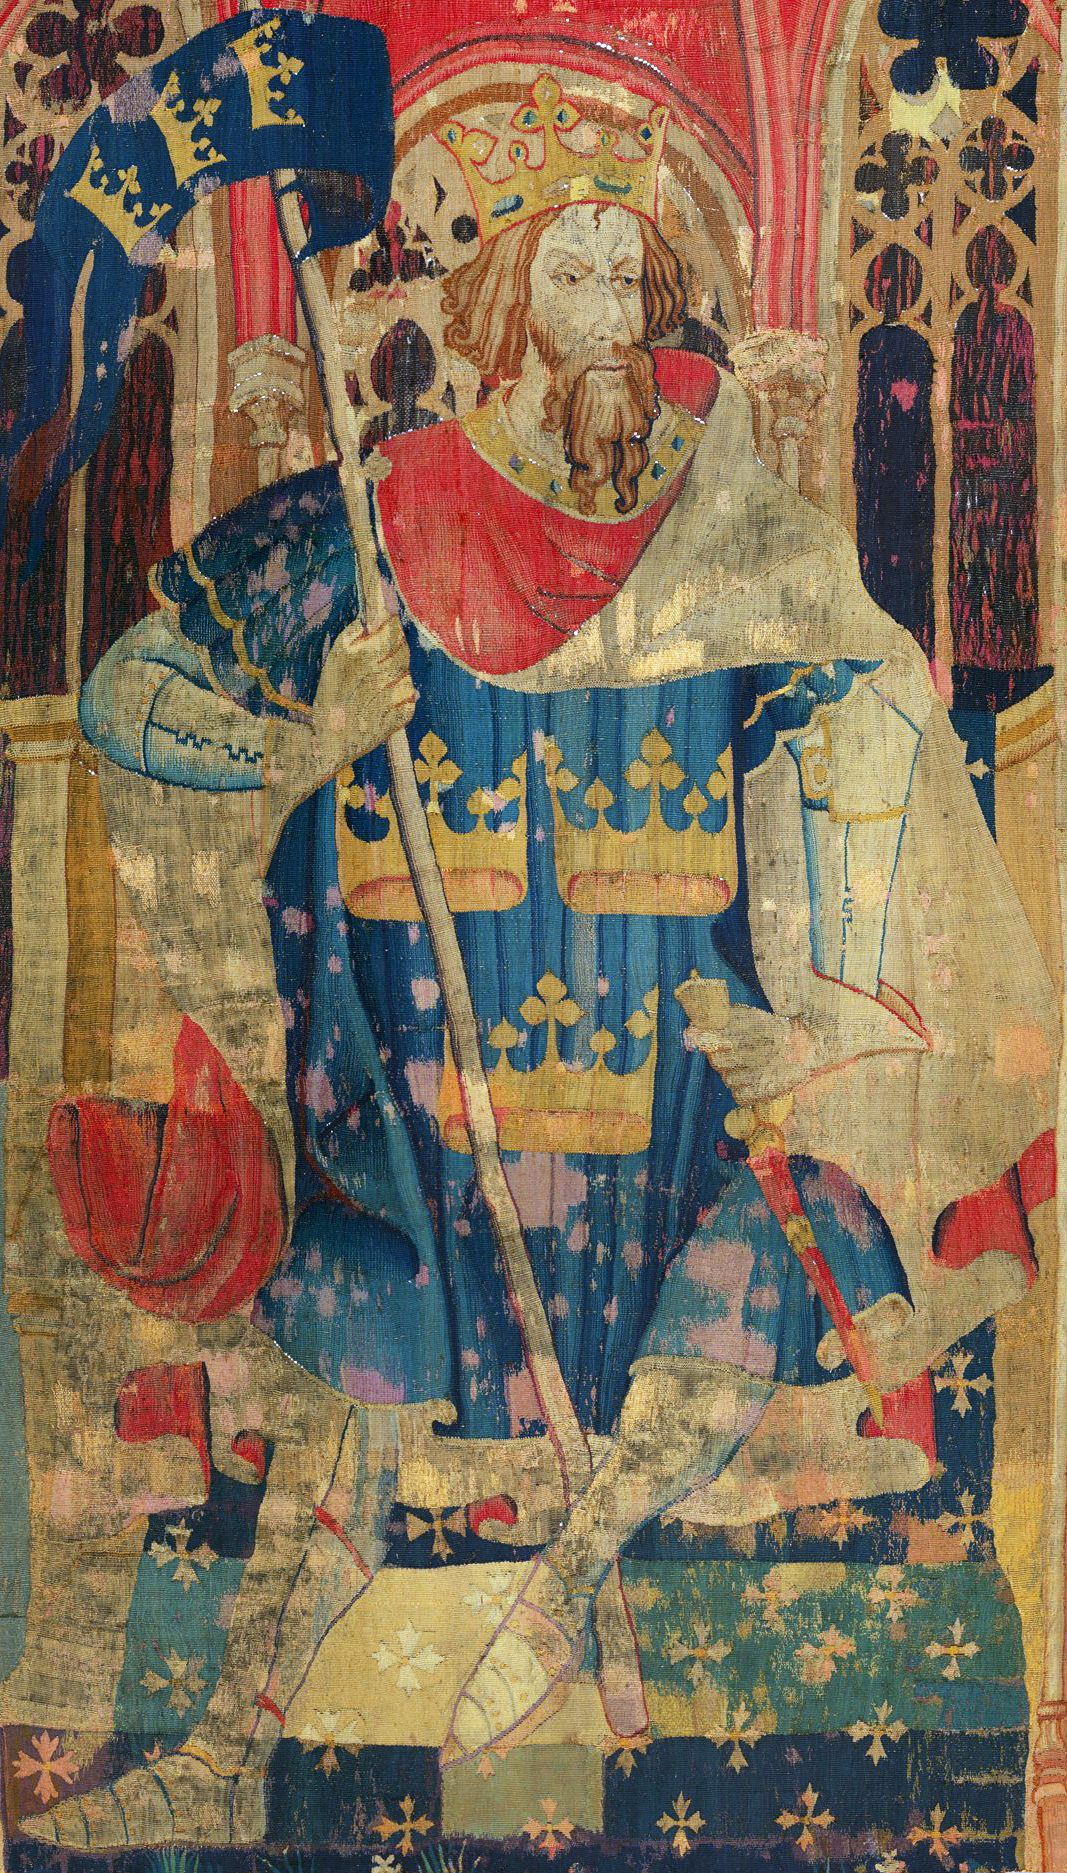 A tapestry depicting King Arthur sitting on a throne, holding a banner.